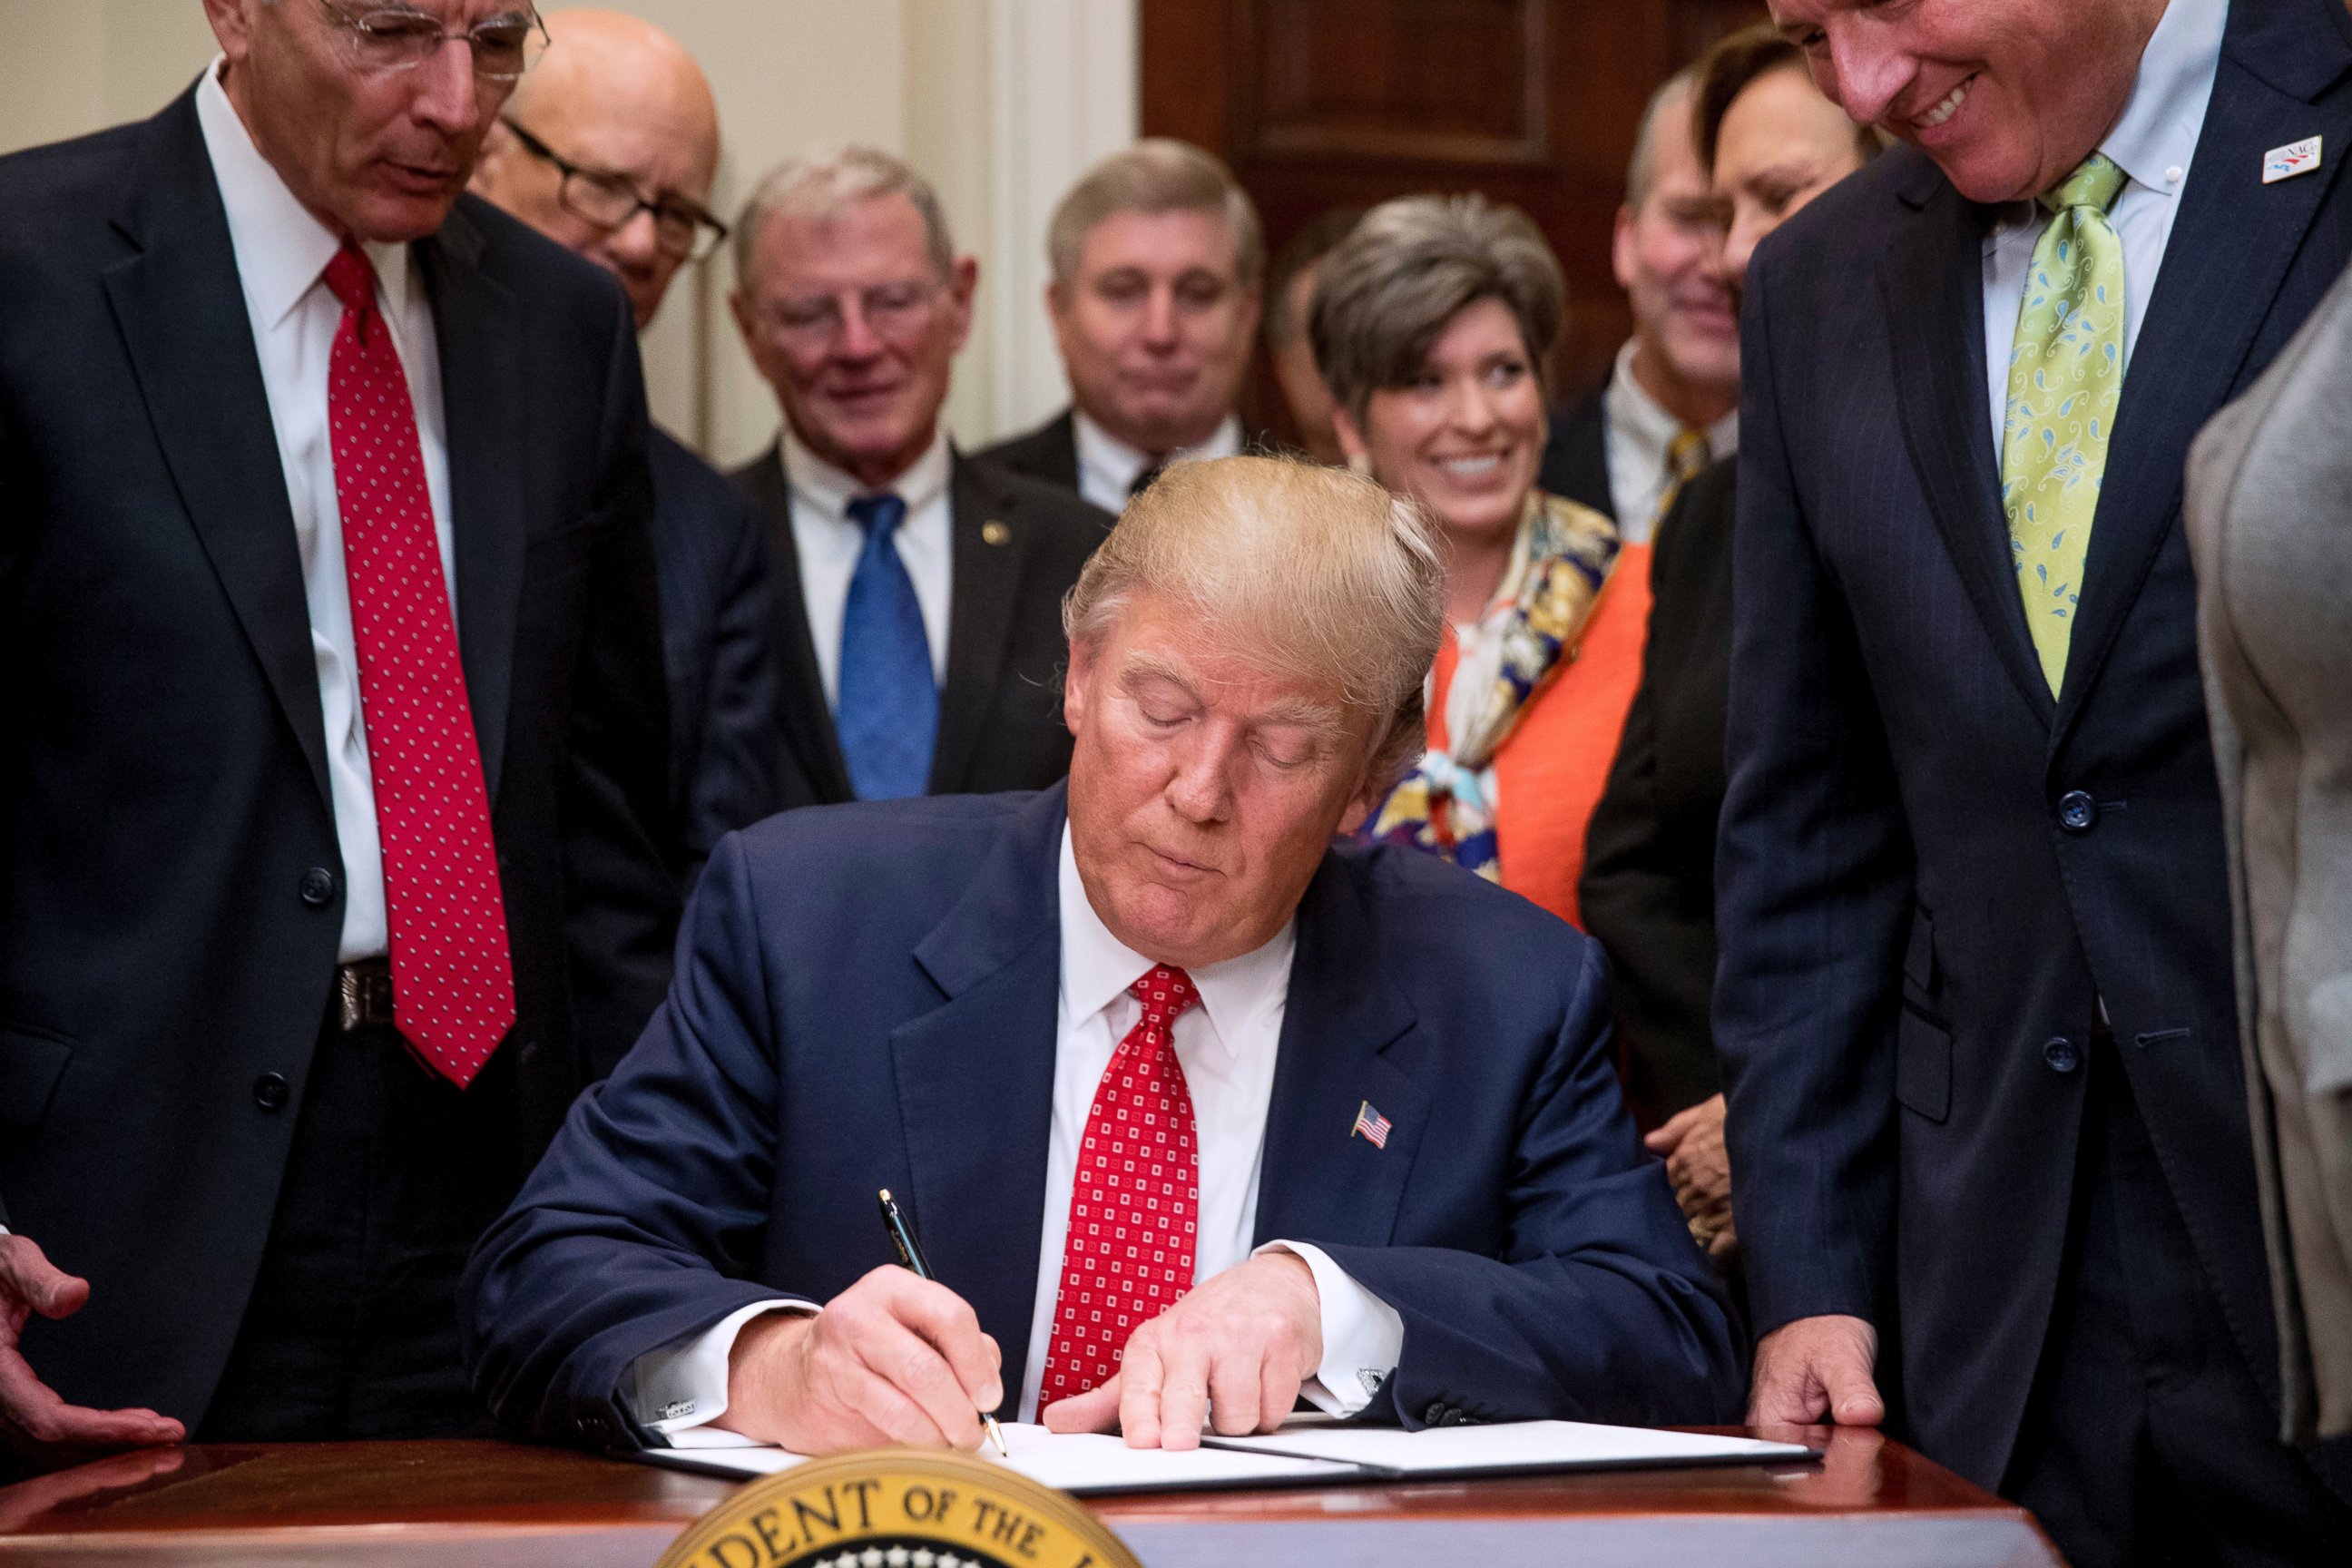 PHOTO: President Donald Trump signs the Waters of the United States (WOTUS) executive order, Feb. 28, 2017, in the Roosevelt Room in the White House in Washington, D.C.